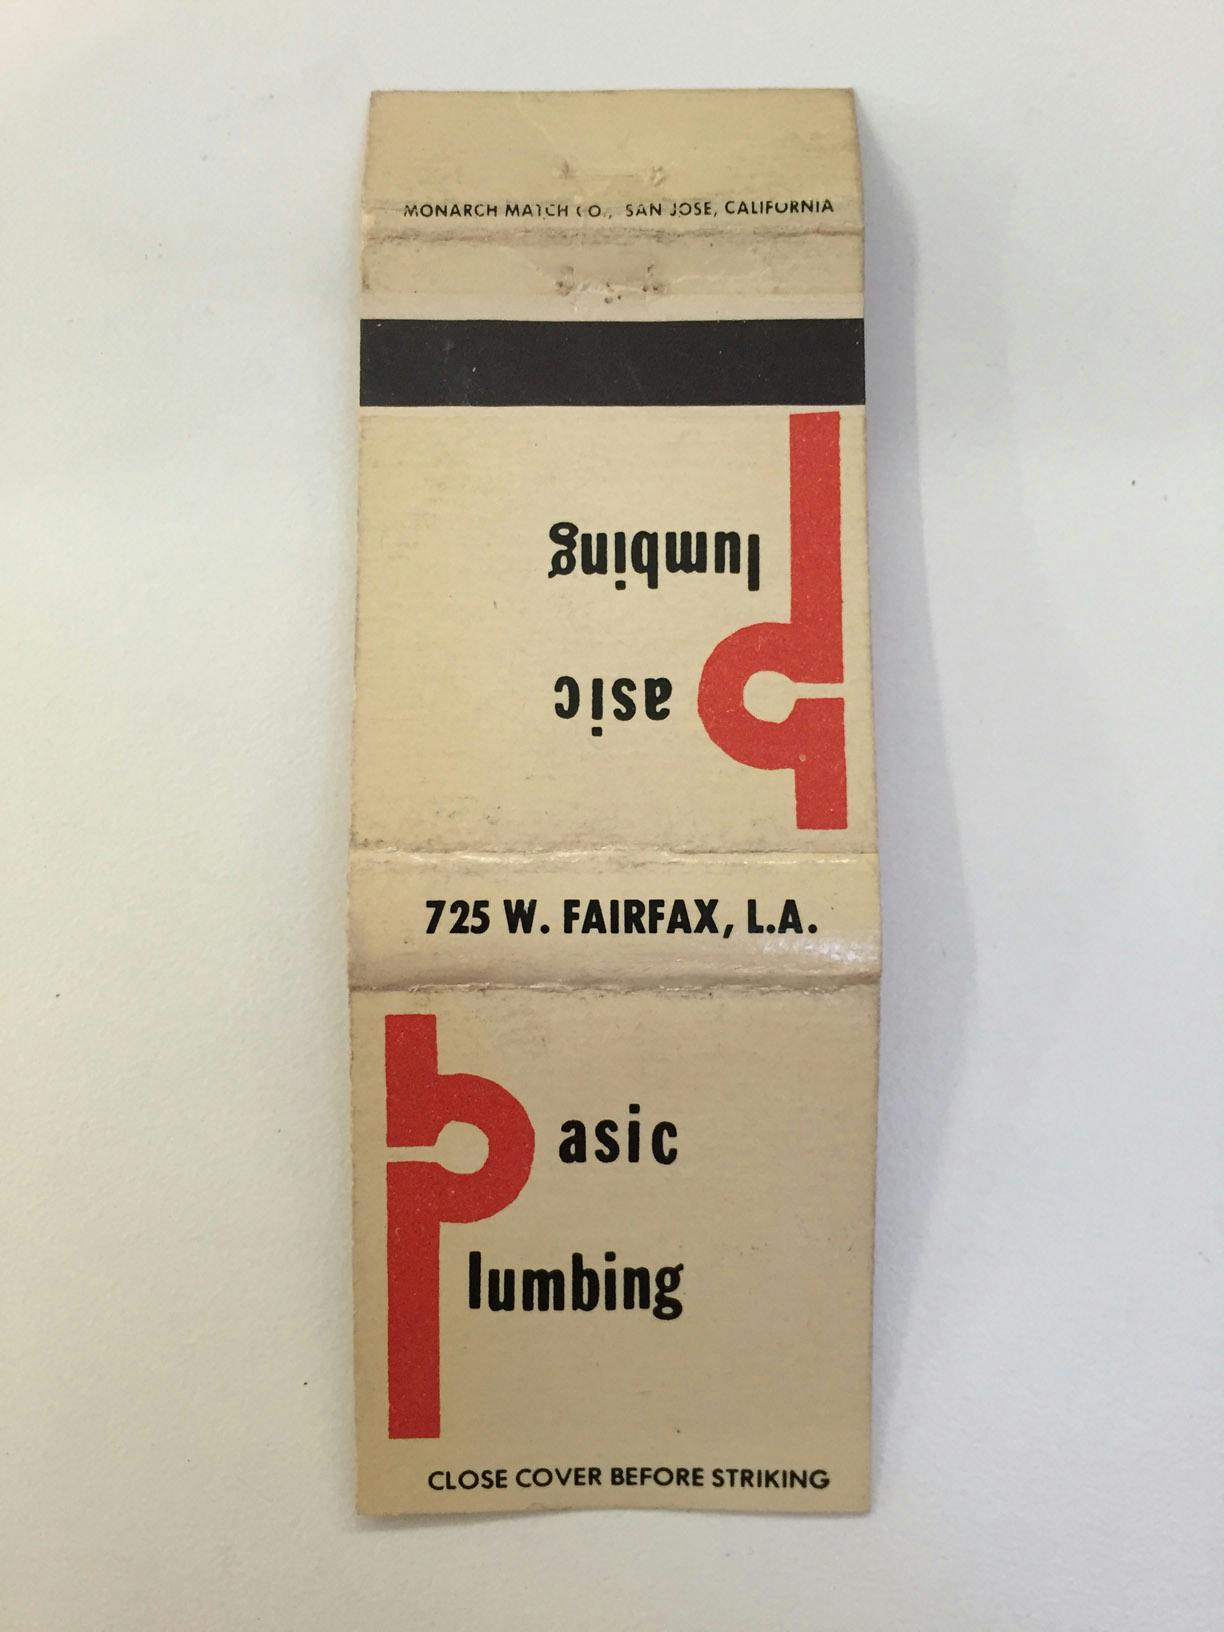 ONE Archives Matchbook Collection